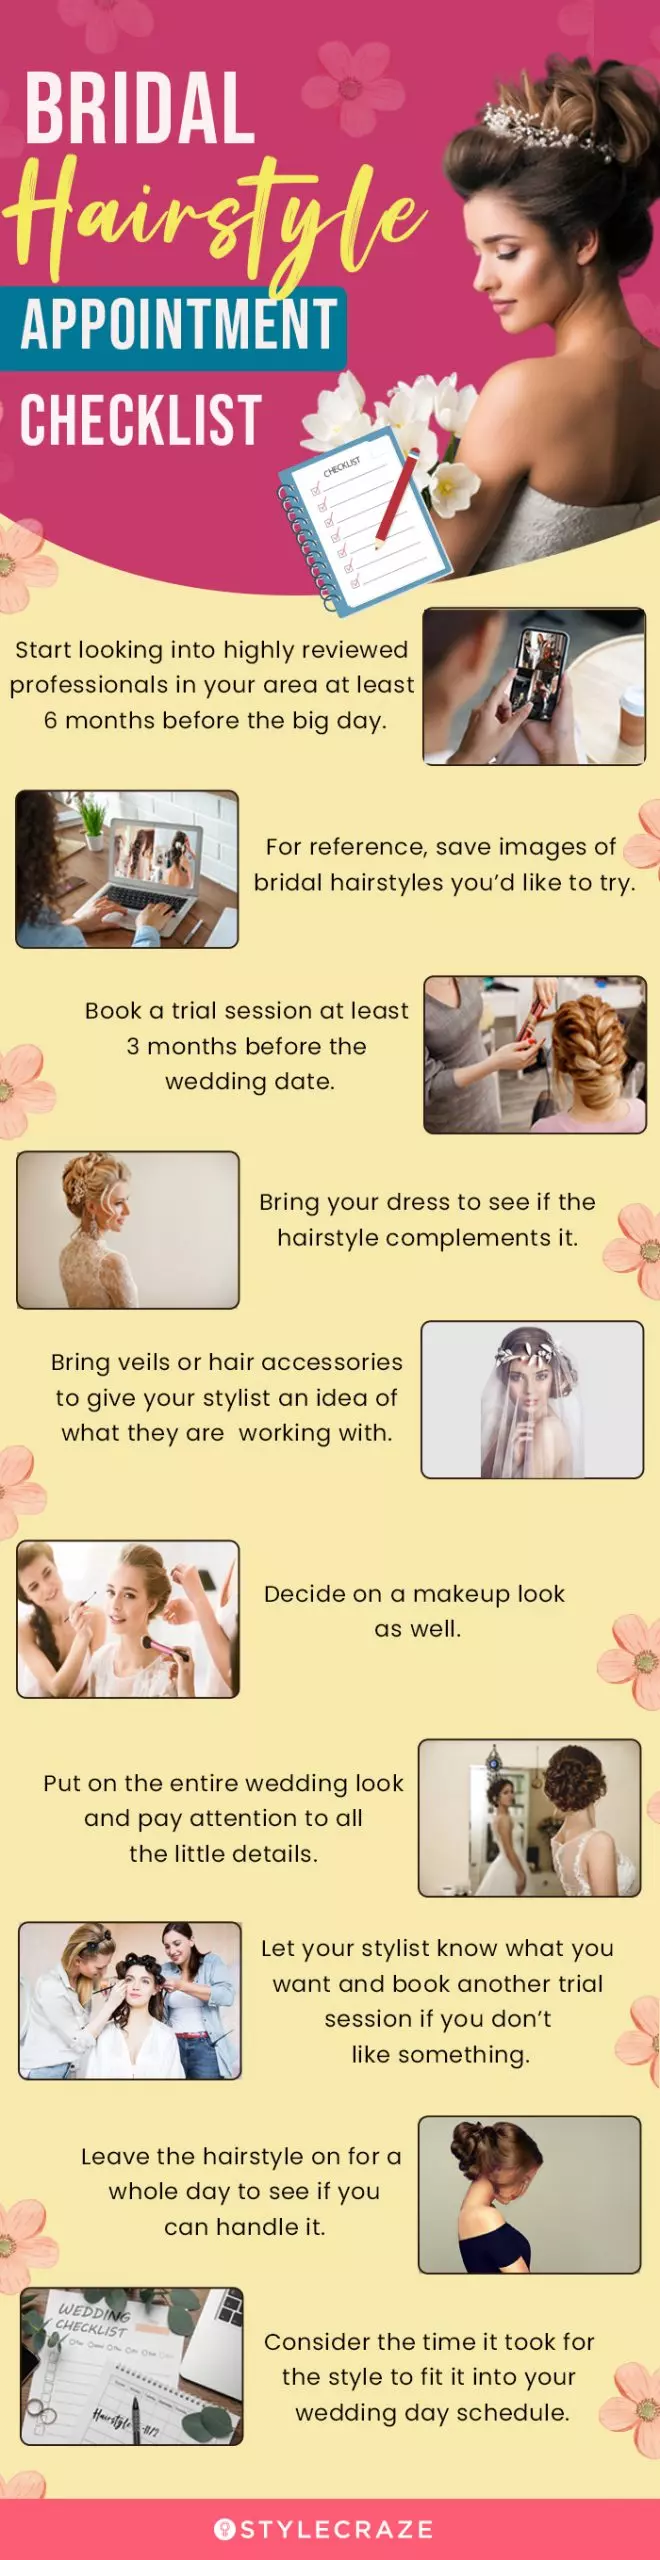 bridal hairstyle with appointent checklist (infographic)